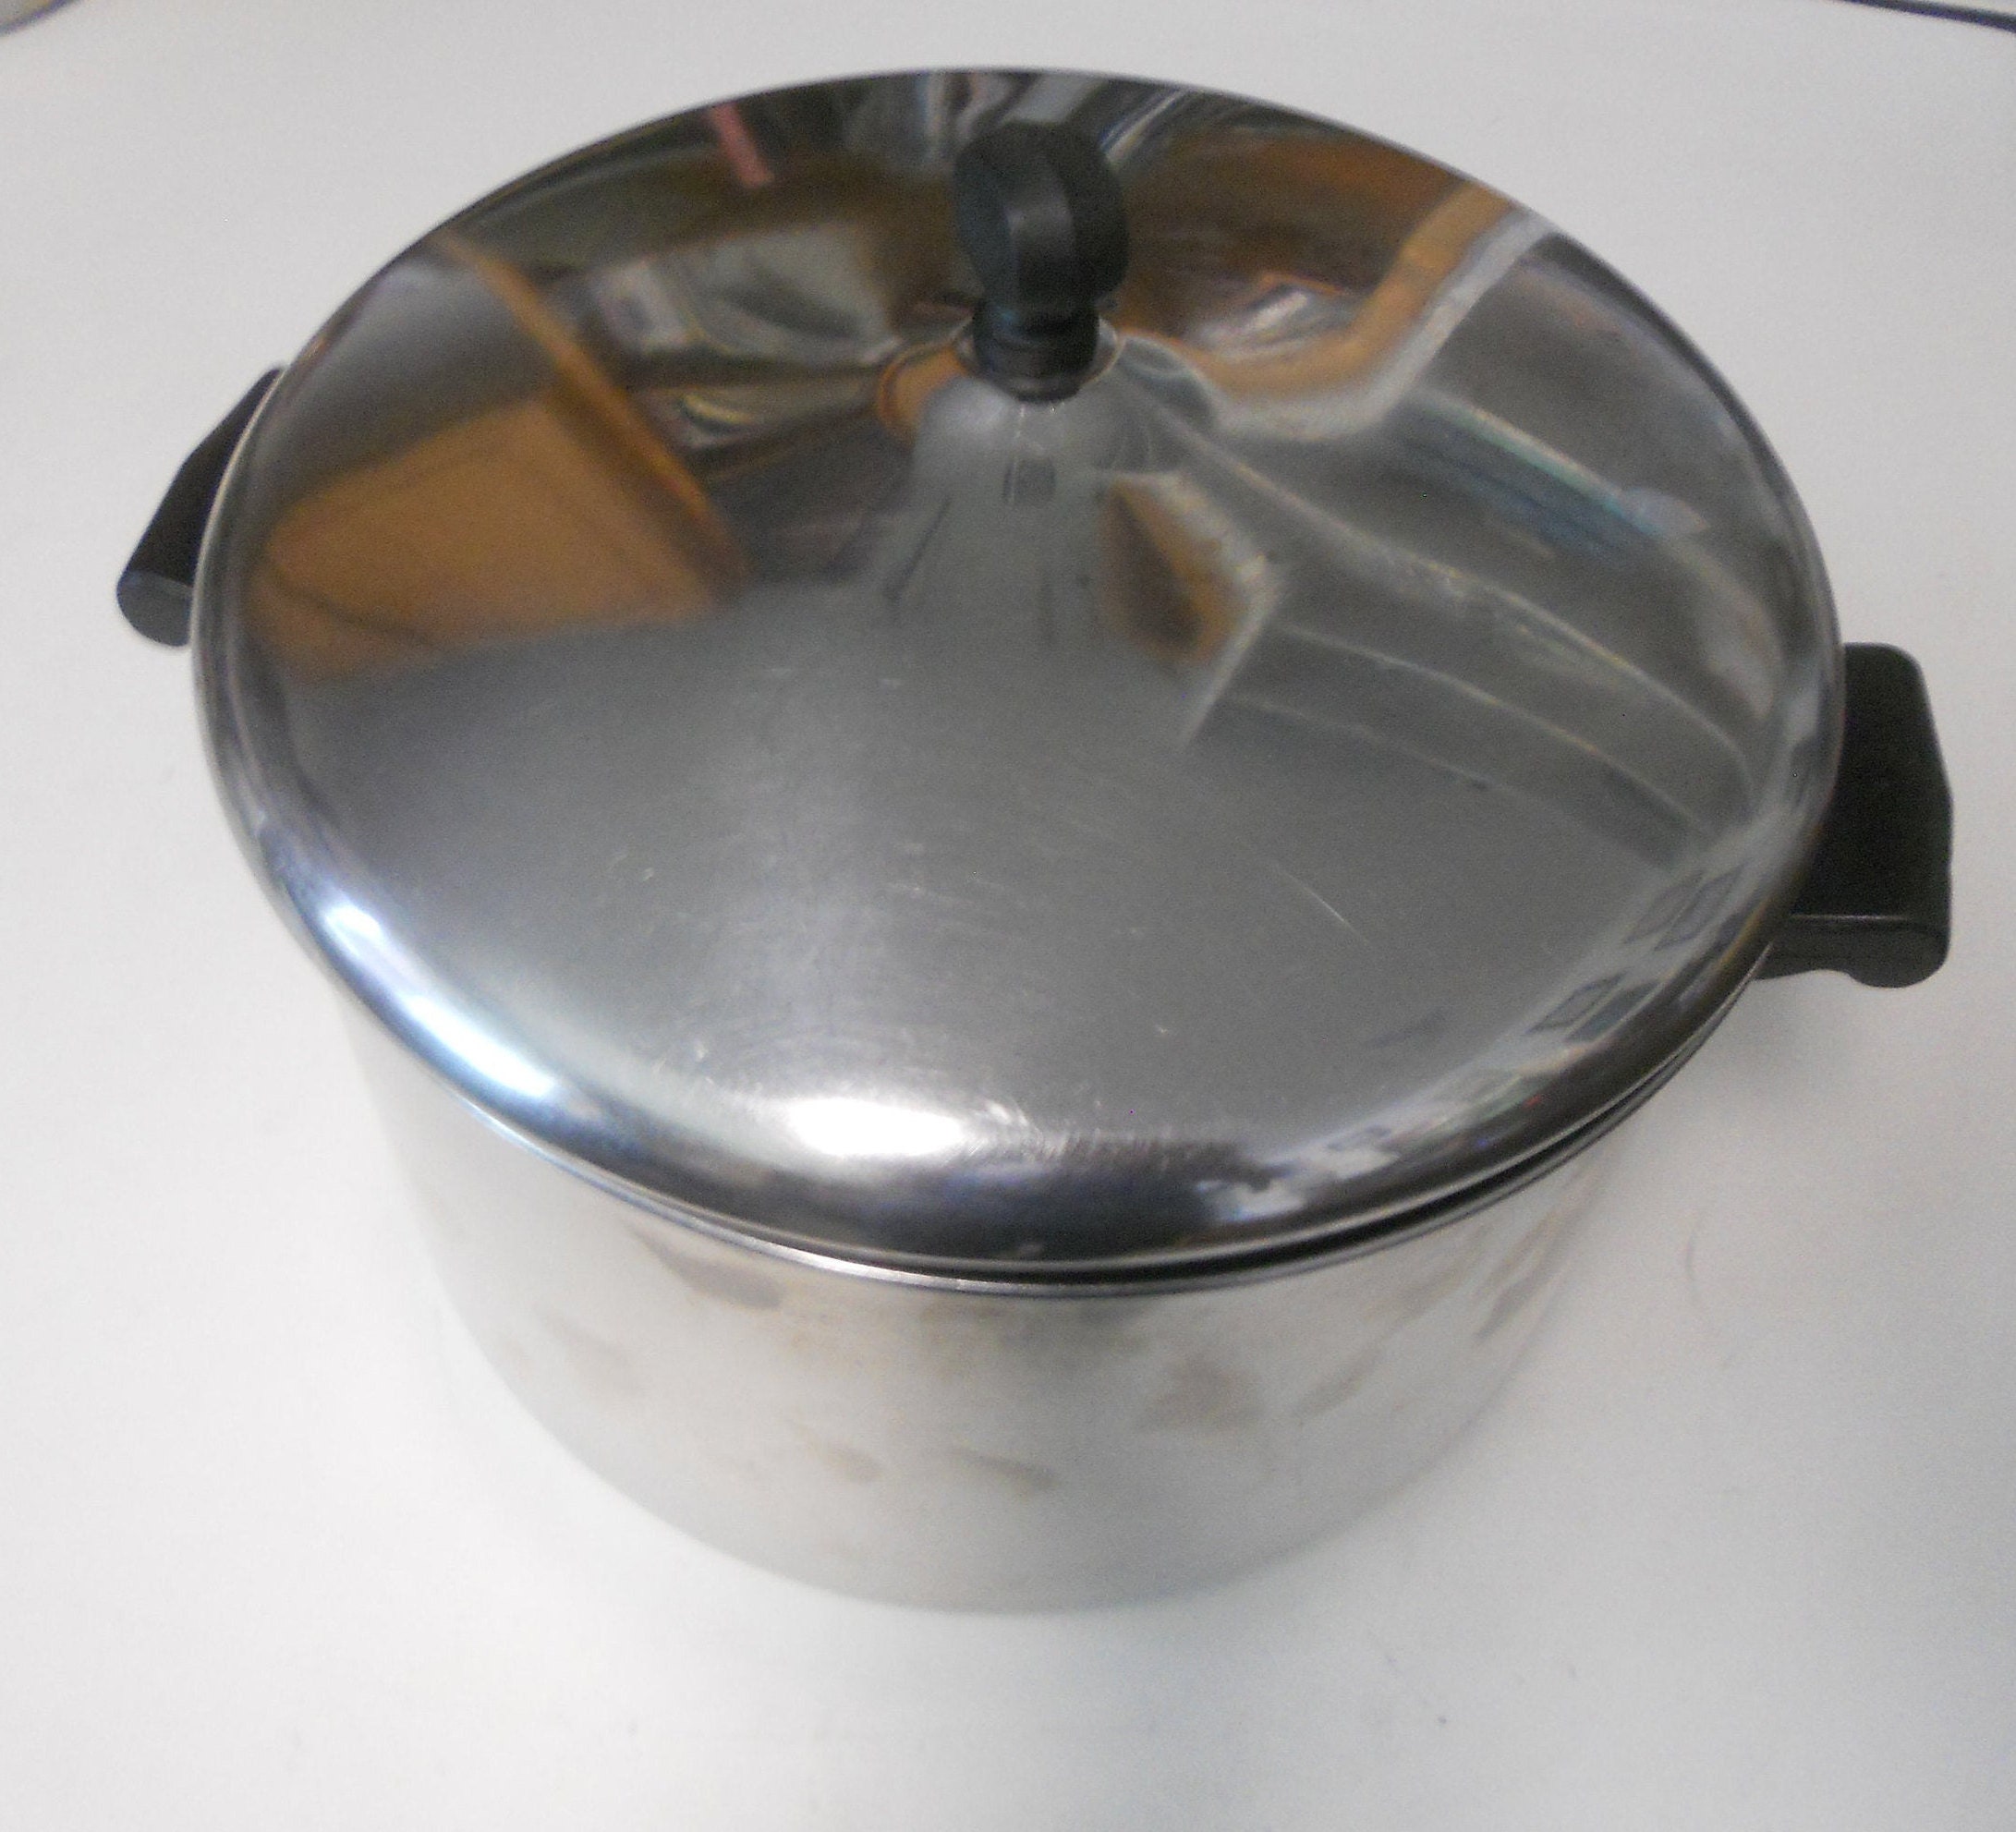 VINTAGE FARBERWARE 3 QT DOUBLE BOILER AND STEAMER/STRAINER WITH LID 4 PCS